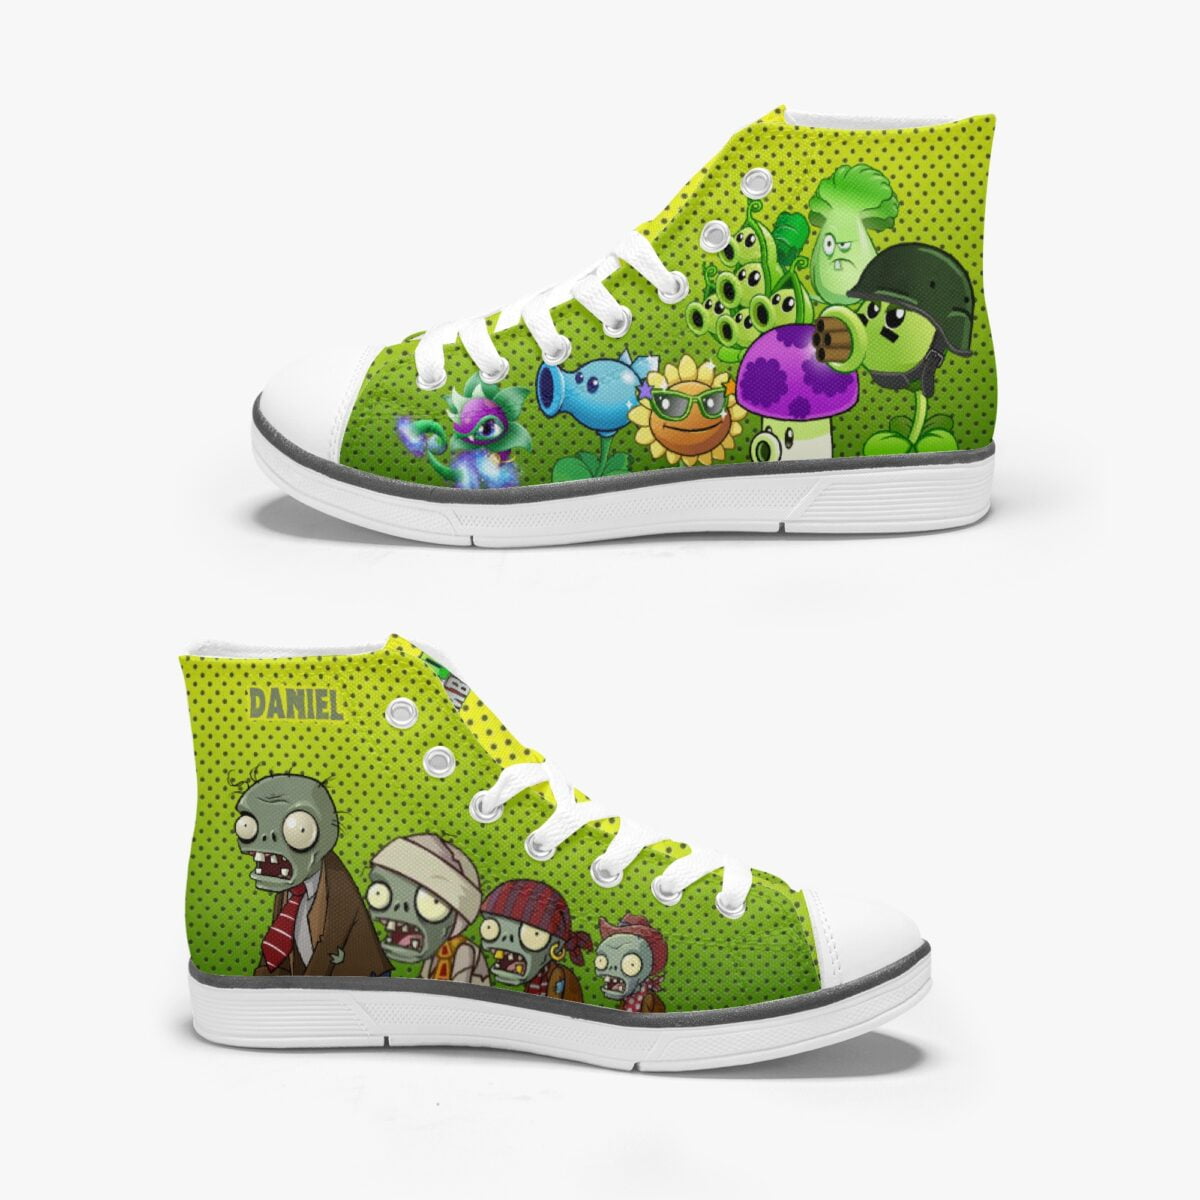 Plants vs Zombies Personalized High-Top Sneakers for Children Cool Kiddo 18